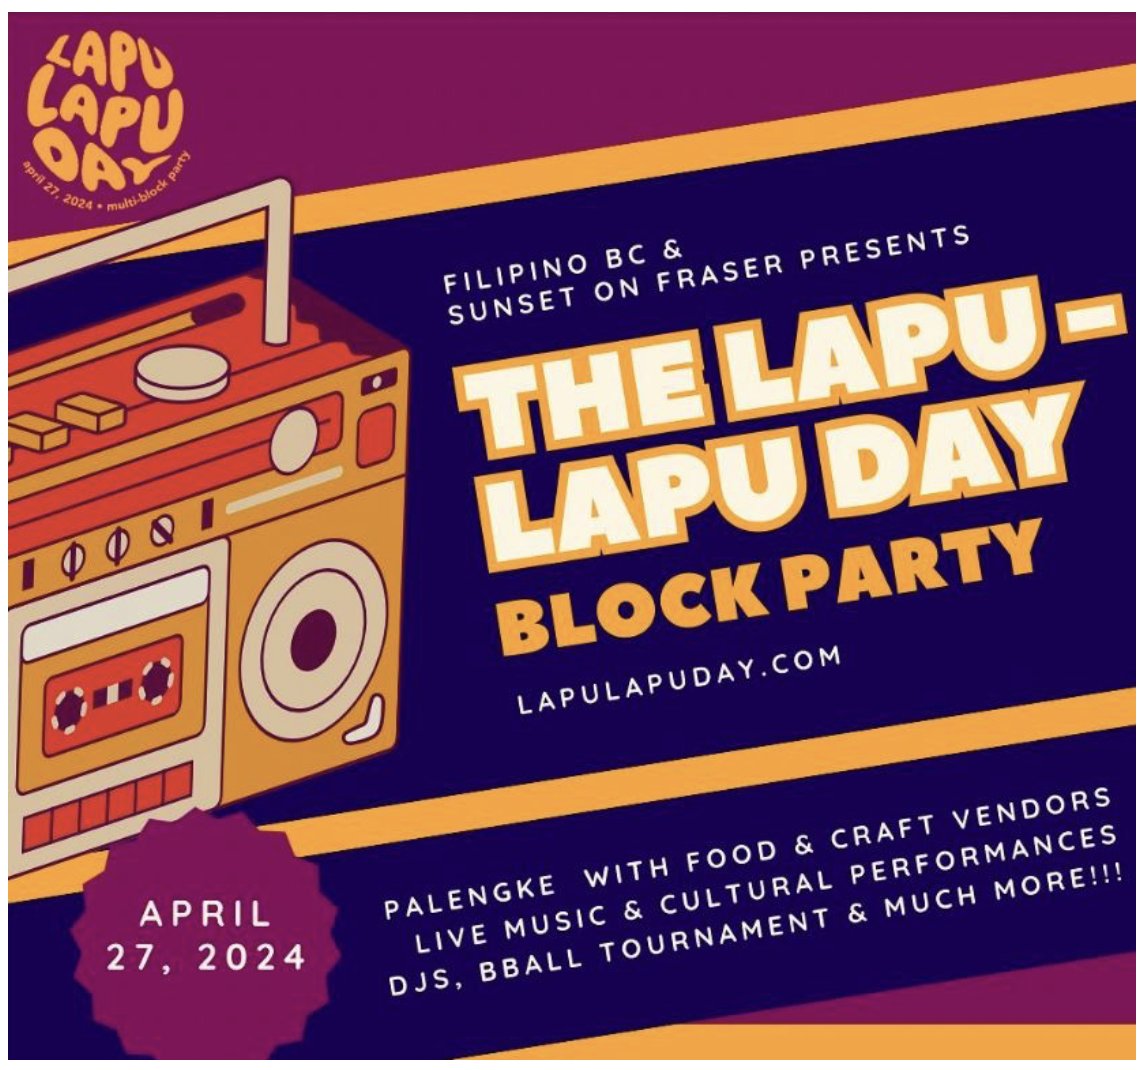 Fraser St. Lapu-Lapu street party on April 27. Activities will take place at the parking lots west of Fraser Street from East 43rd to East 48th Avenues, and at the gym and auditorium of John Oliver Secondary School. #filipino #Fraserstreet #southvan #multicultural #diversity